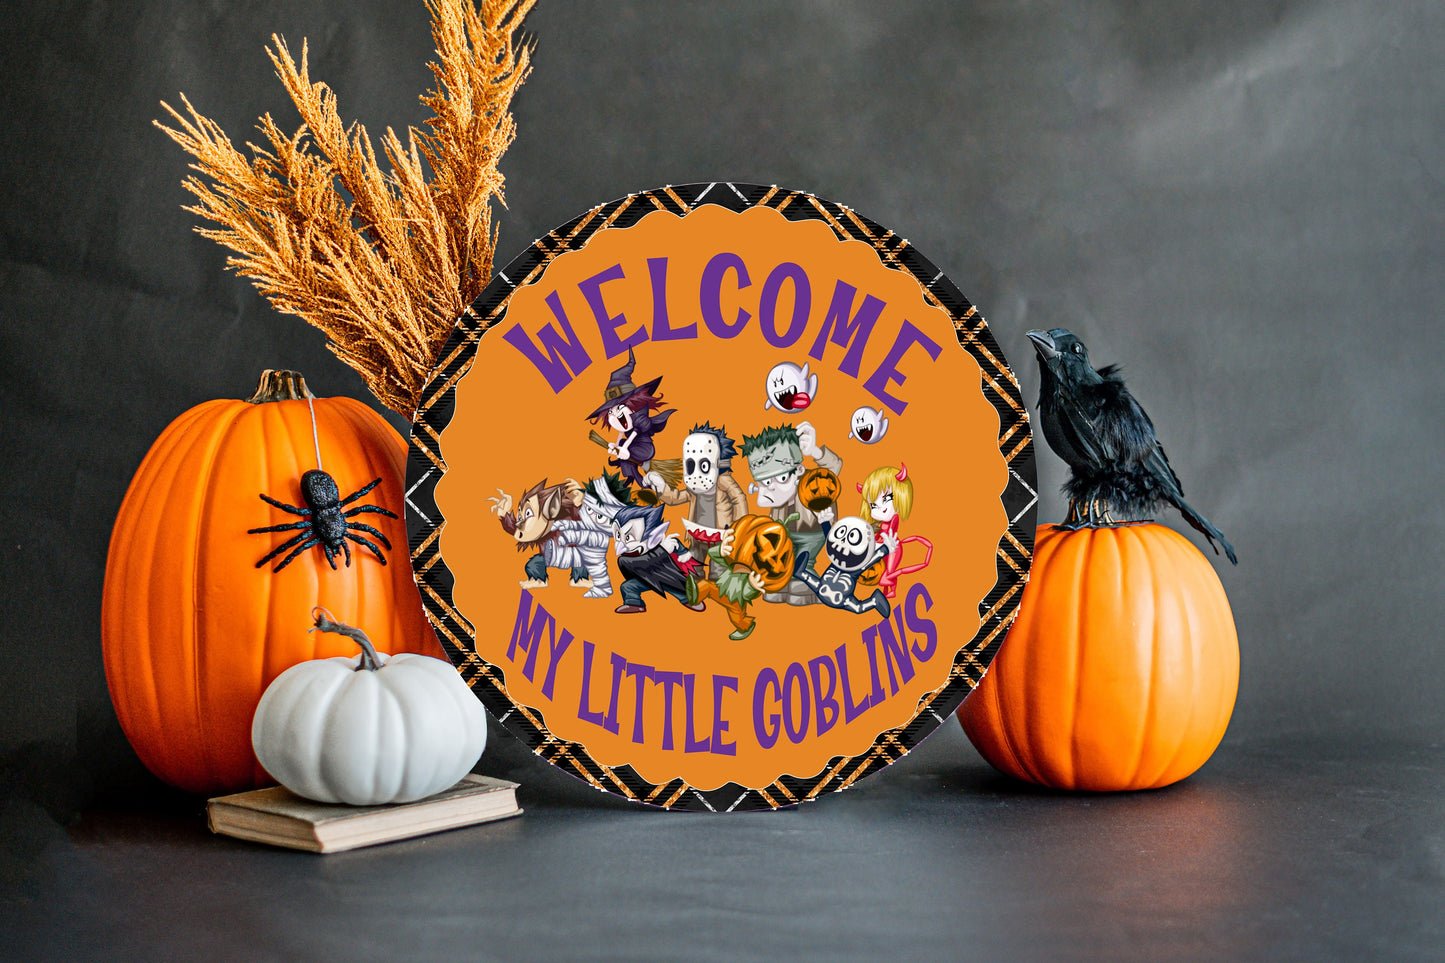 Welcome My Little Gobblins Halloween Round Printed Handmade Wood Sign